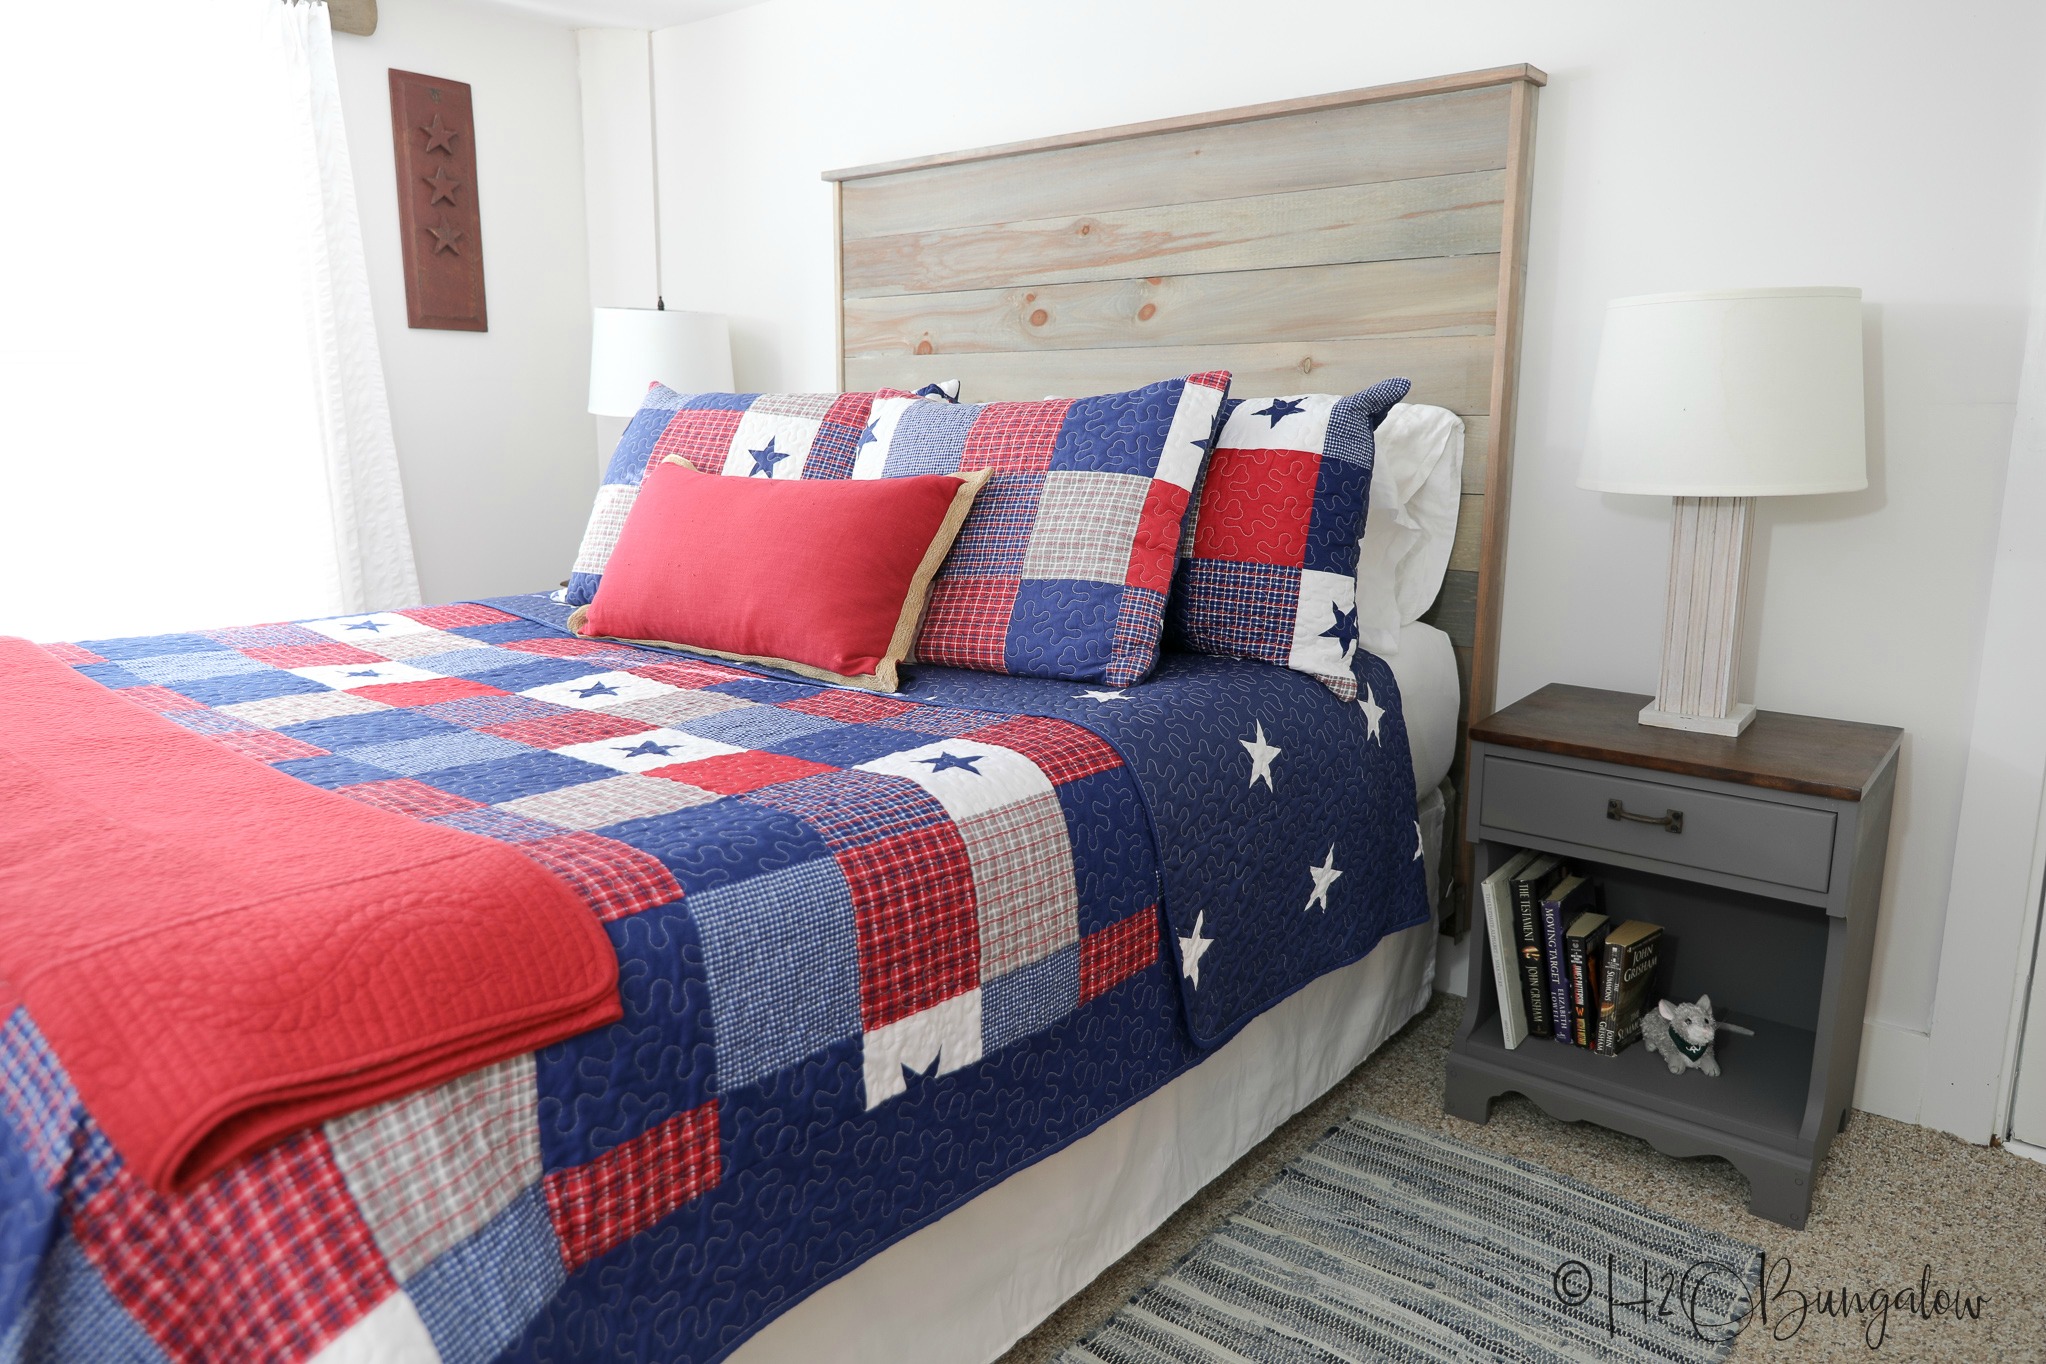 DIY rustic headboard tutorial with video to make a queen size wood headboard. Modify these plans for other bed sizes. Under $50 to make this modern headboard. 